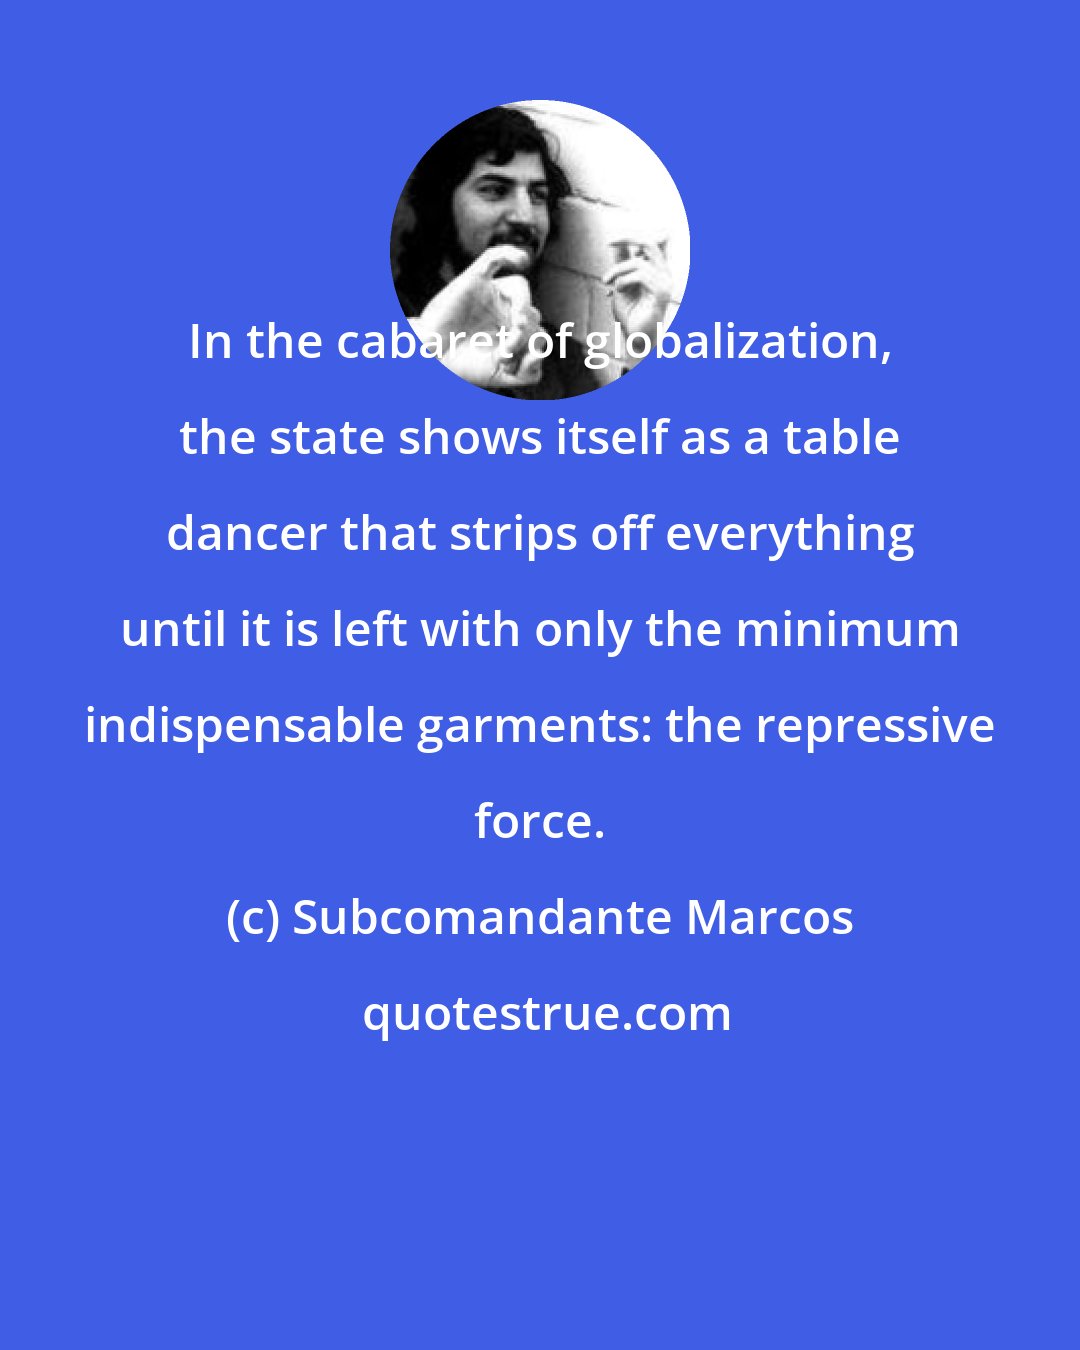 Subcomandante Marcos: In the cabaret of globalization, the state shows itself as a table dancer that strips off everything until it is left with only the minimum indispensable garments: the repressive force.